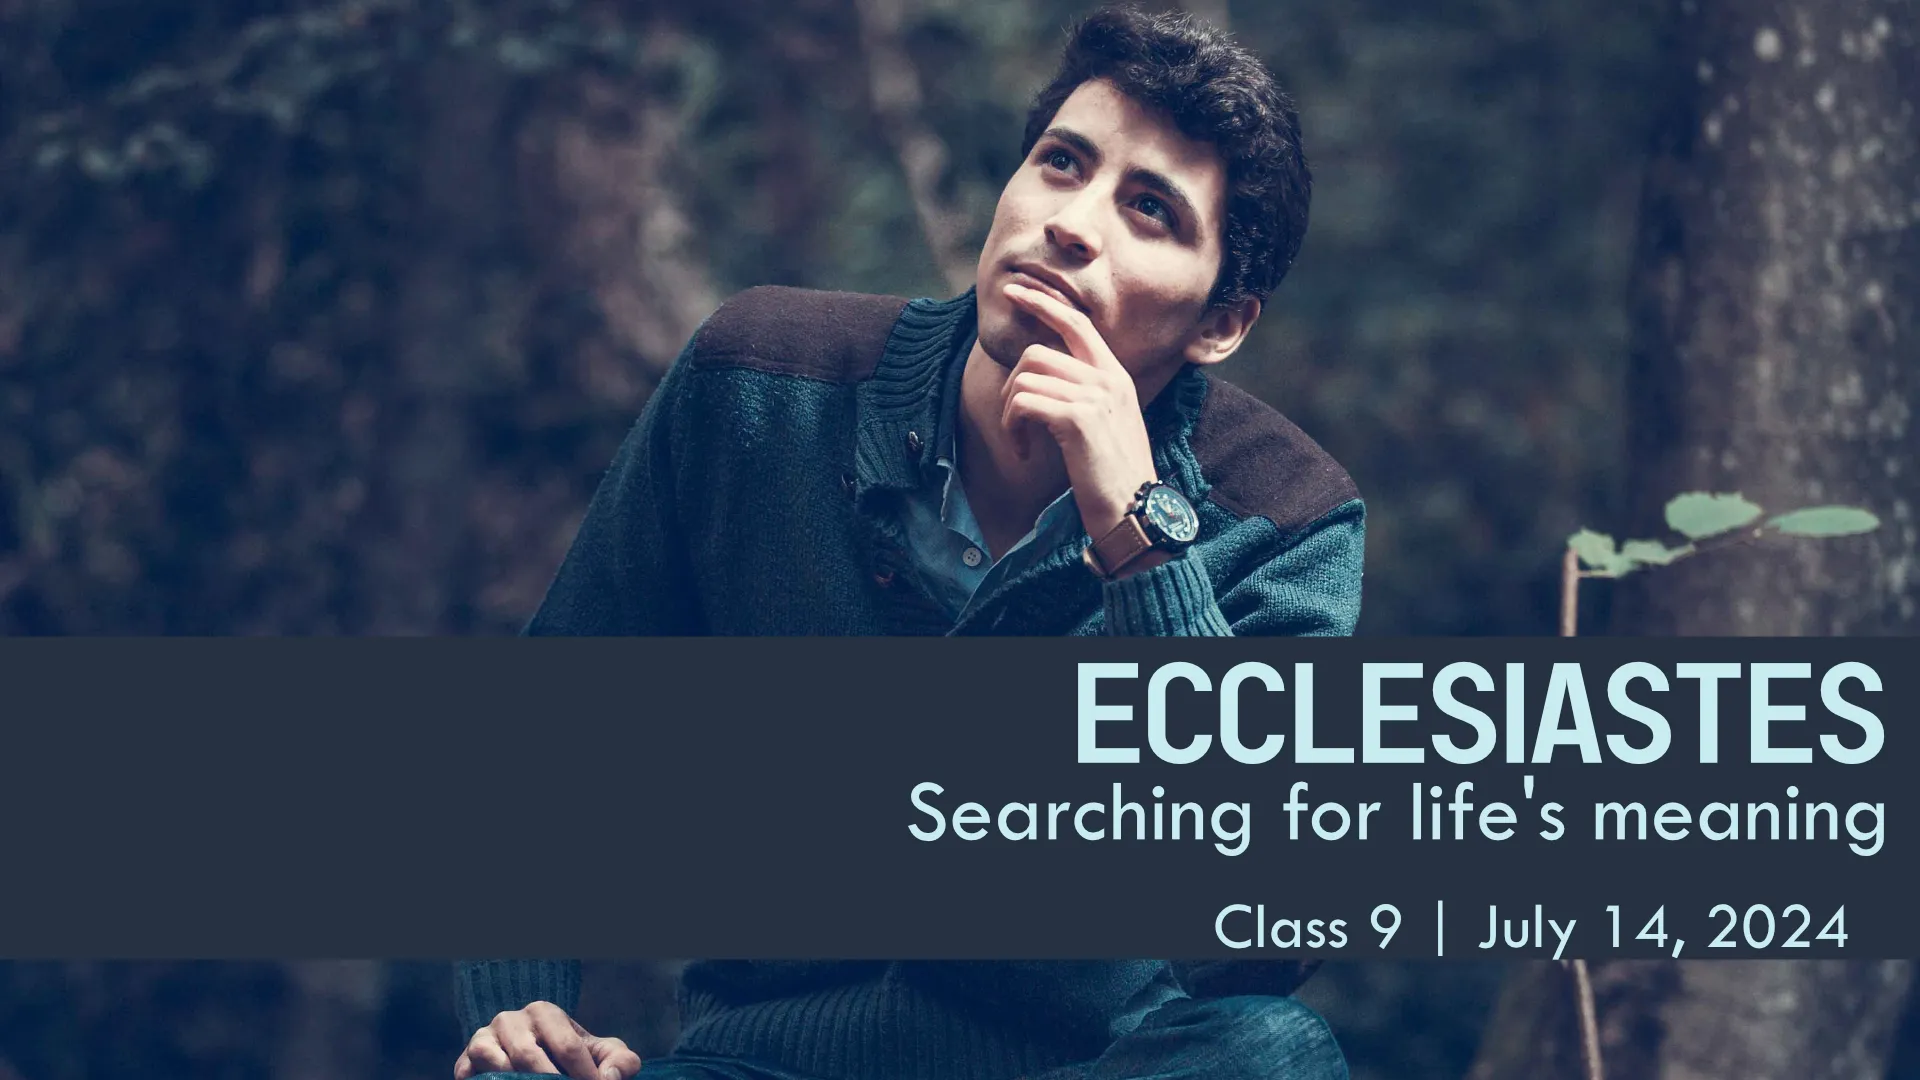 Ecclesiastes: Searching for life's meaning | Class 9